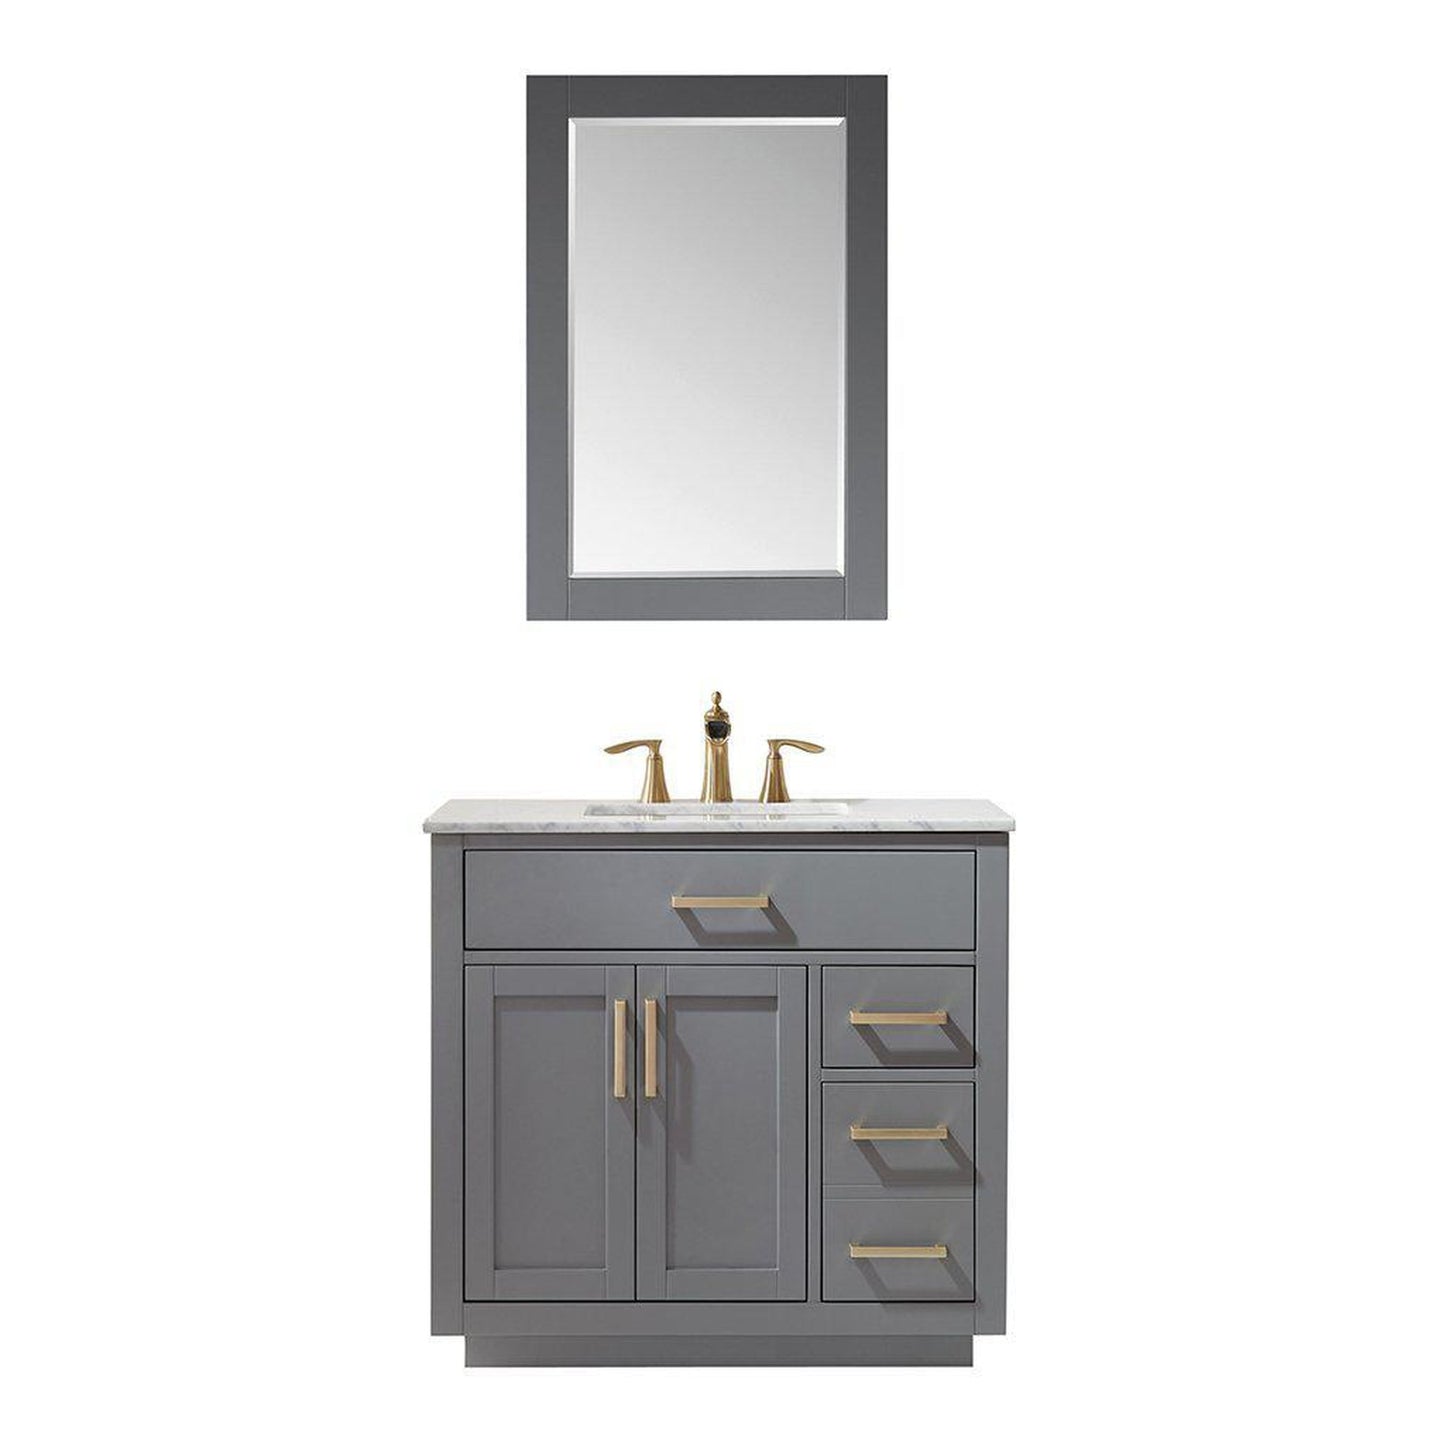 Altair Ivy 36" Single Gray Freestanding Bathroom Vanity Set With Mirror, Natural Carrara White Marble Top, Rectangular Undermount Ceramic Sink, and Overflow